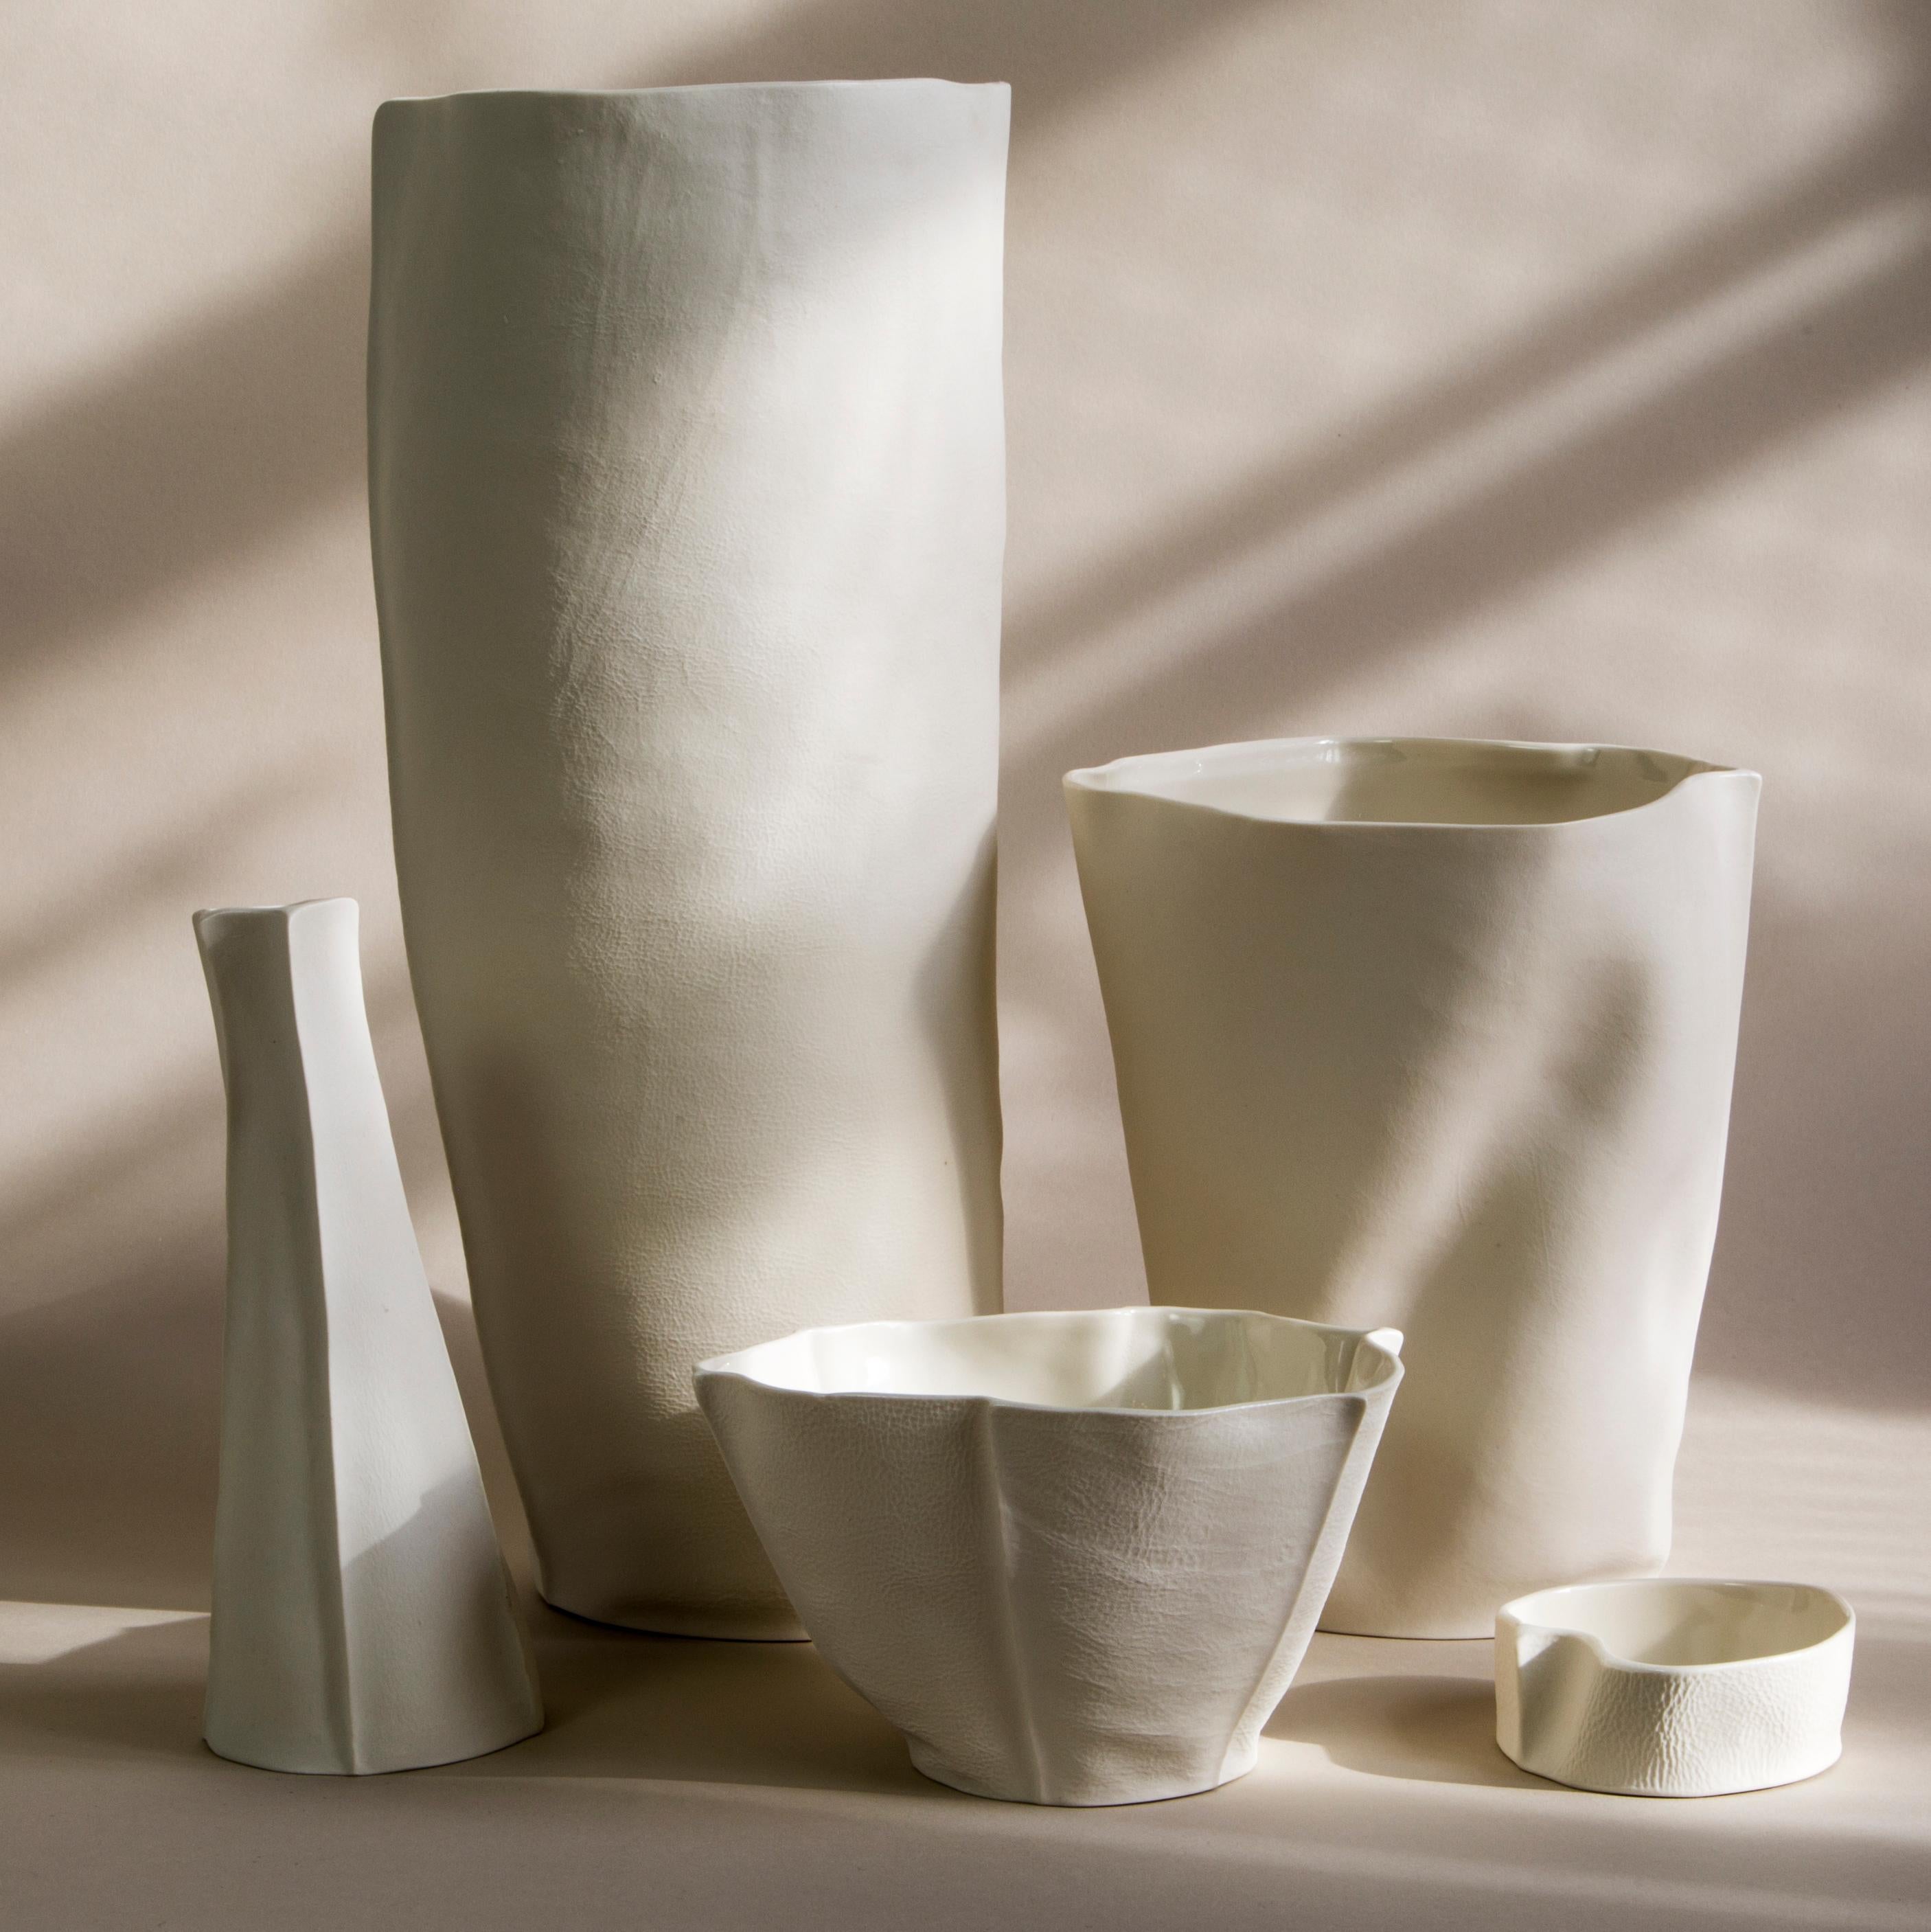 A set of 5 leather-cast porcelain vases & bowls with textured exterior surface and clear glazed interior. Dynamic and organic in form, the set can be used as a cluster or individually. Perfect for styling a foyer console, modern credenza, or as a